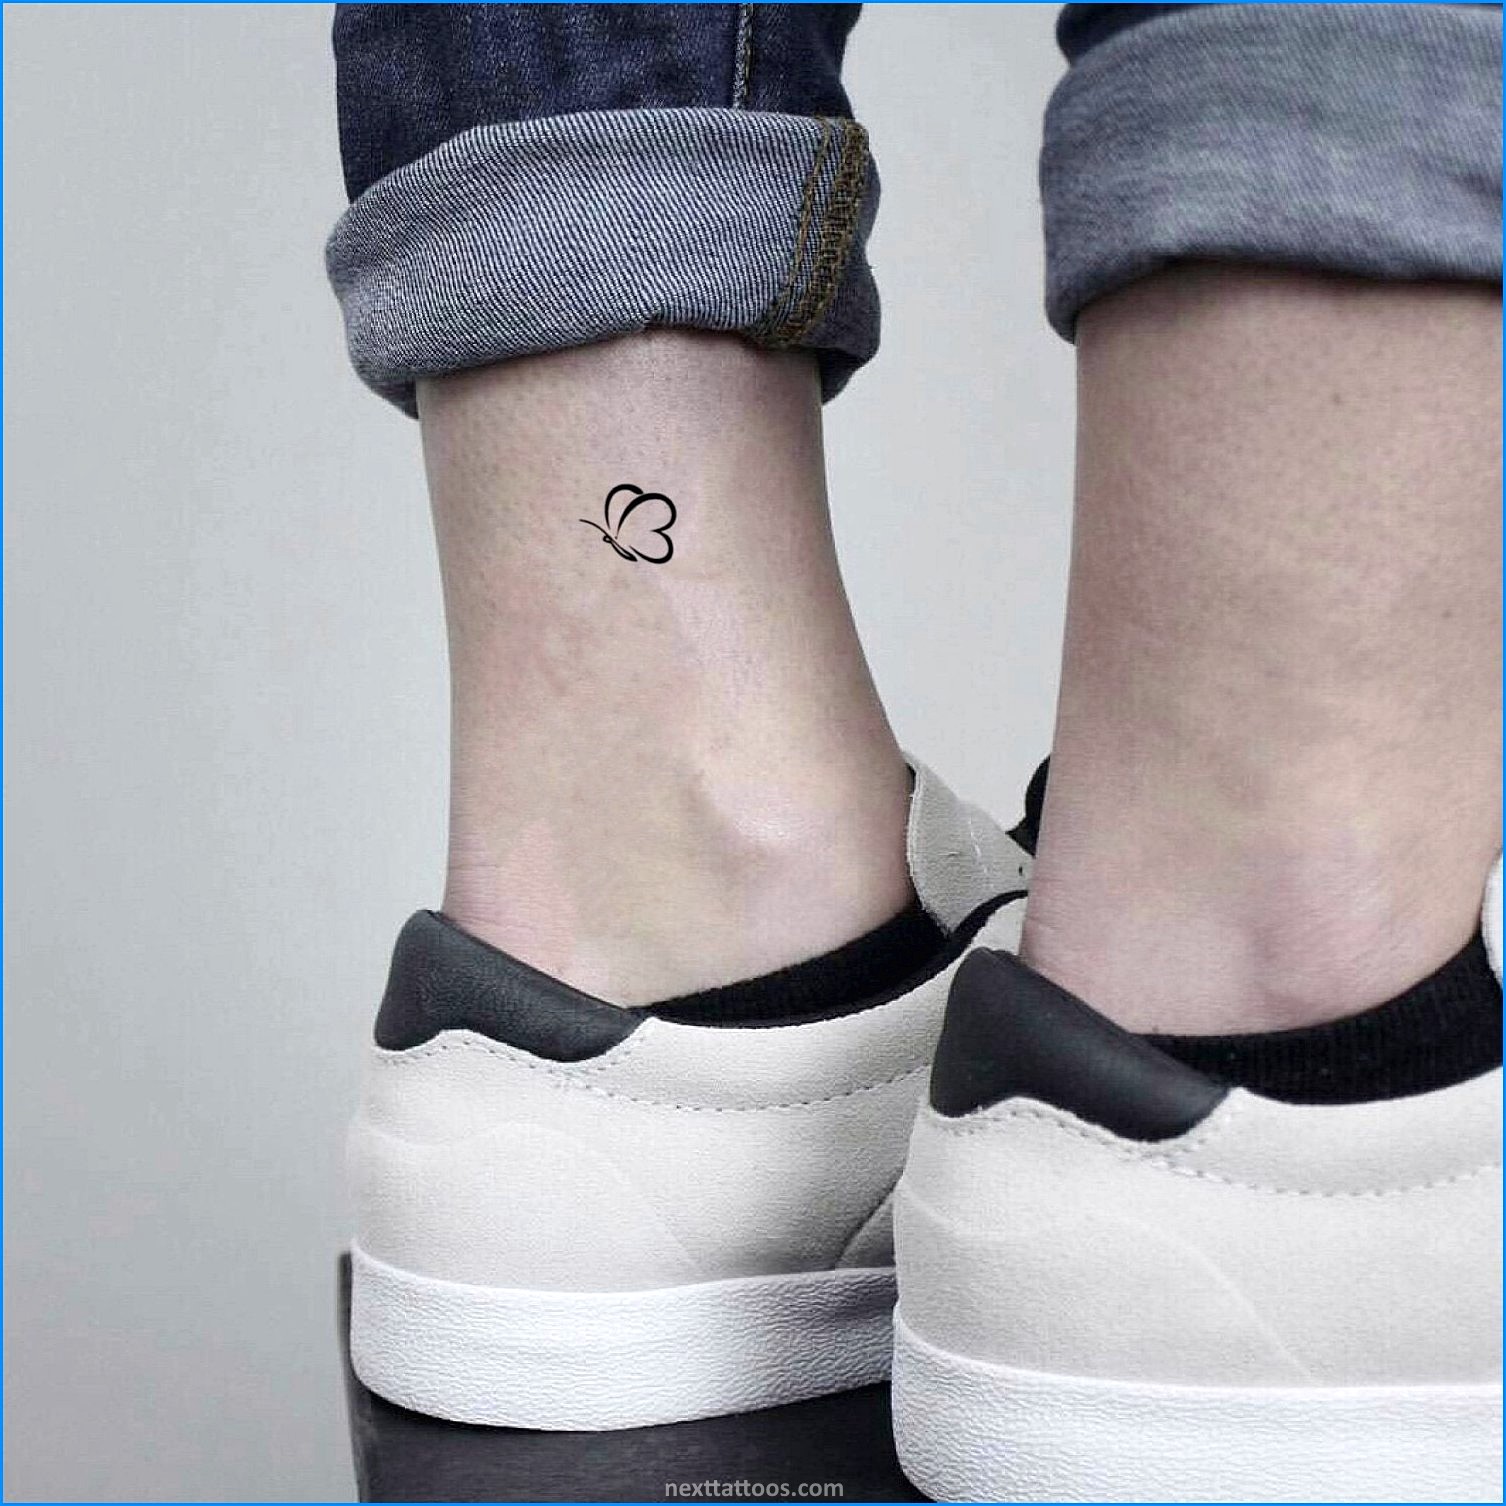 Small Unisex Tattoo Ideas For Both Men and Women